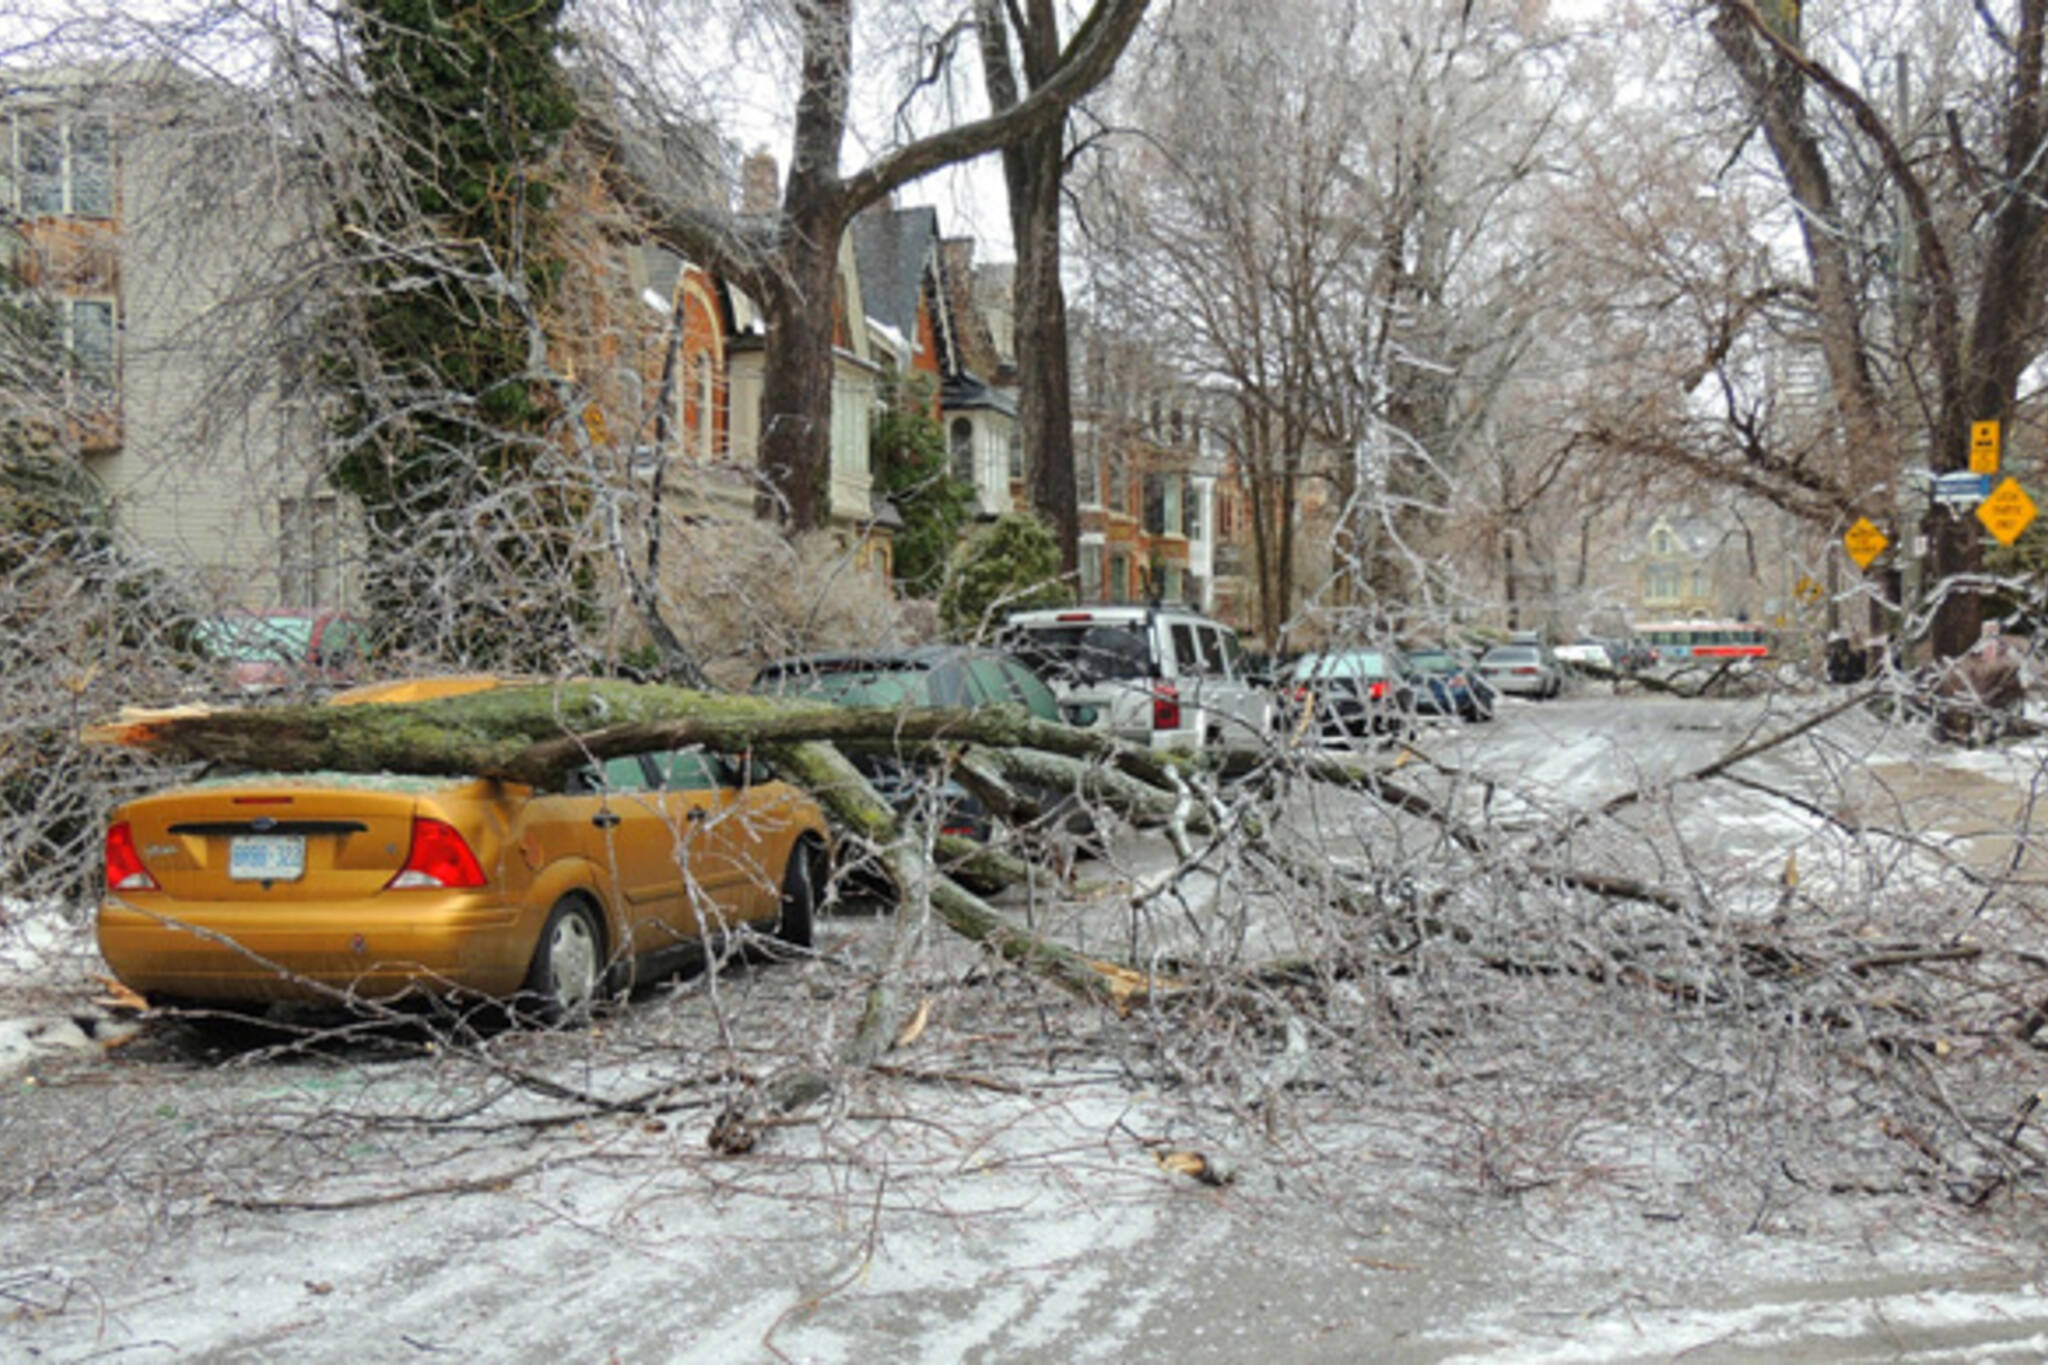 20 frozen photos of the ice storm aftermath in Toronto - 2048 x 1365 jpeg 388kB